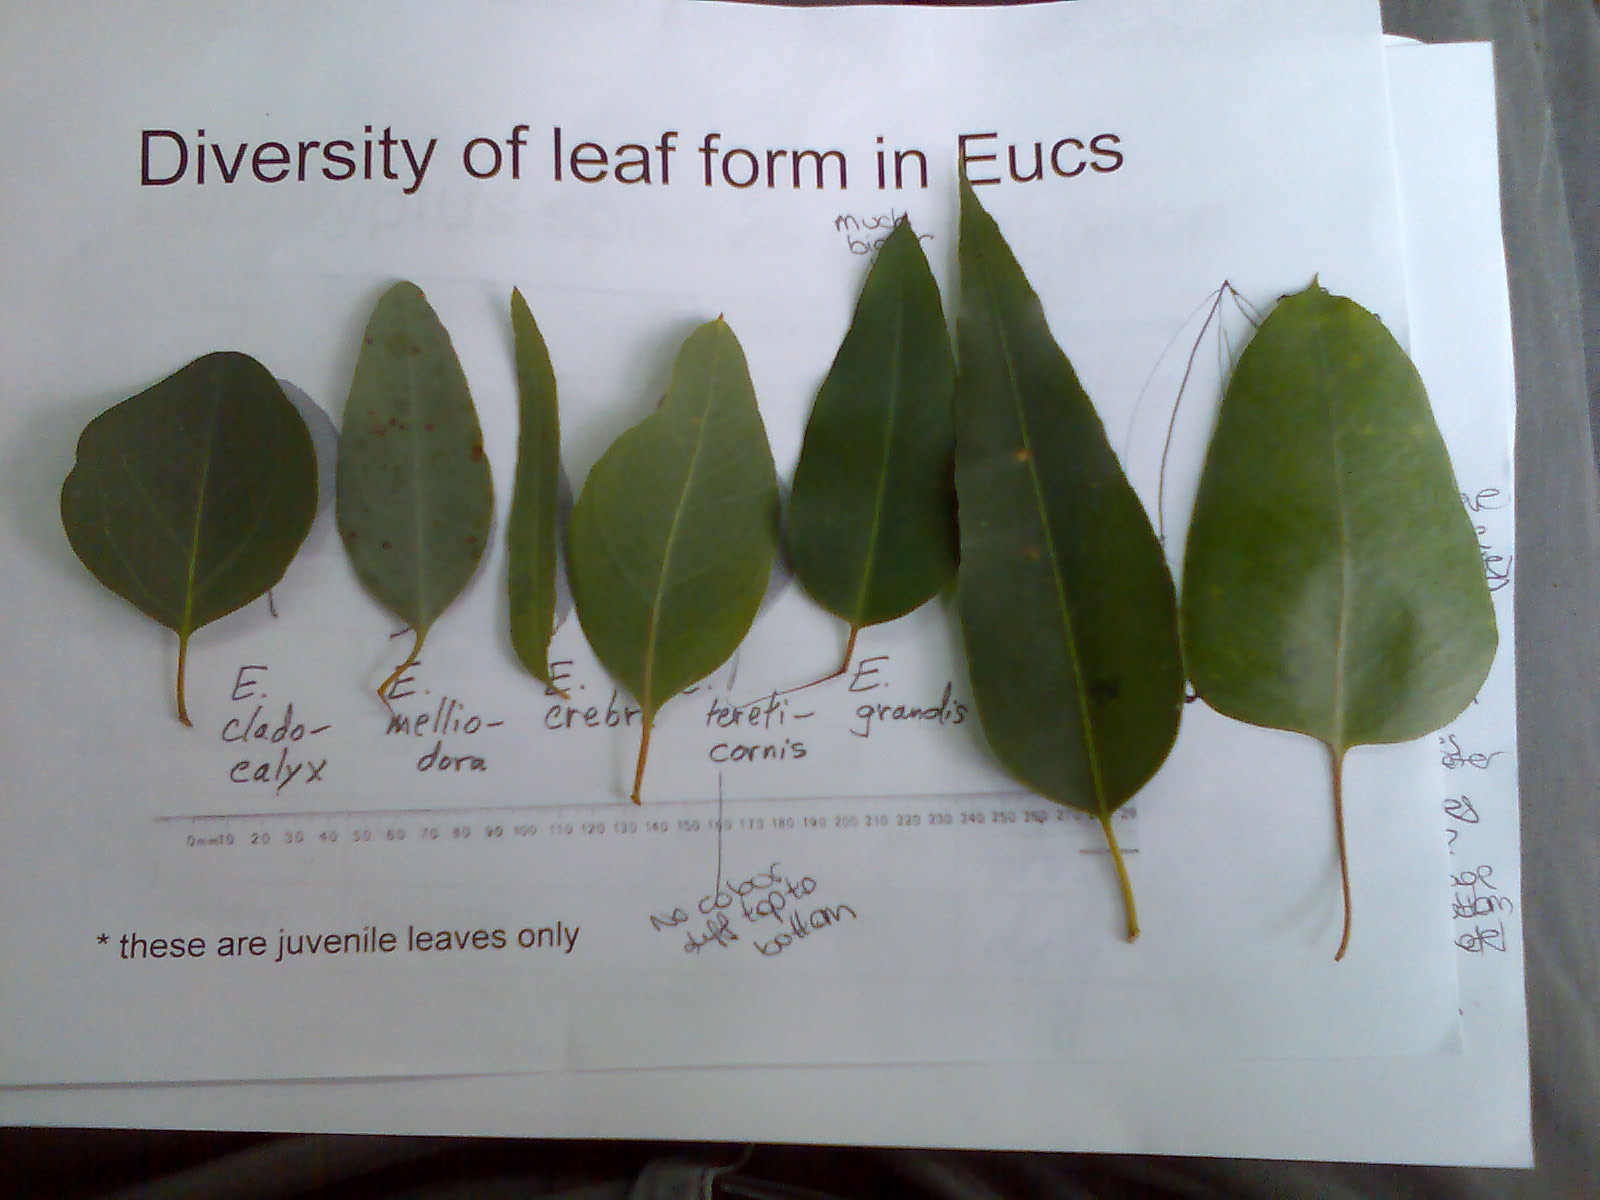 Leaf form in eucalypts